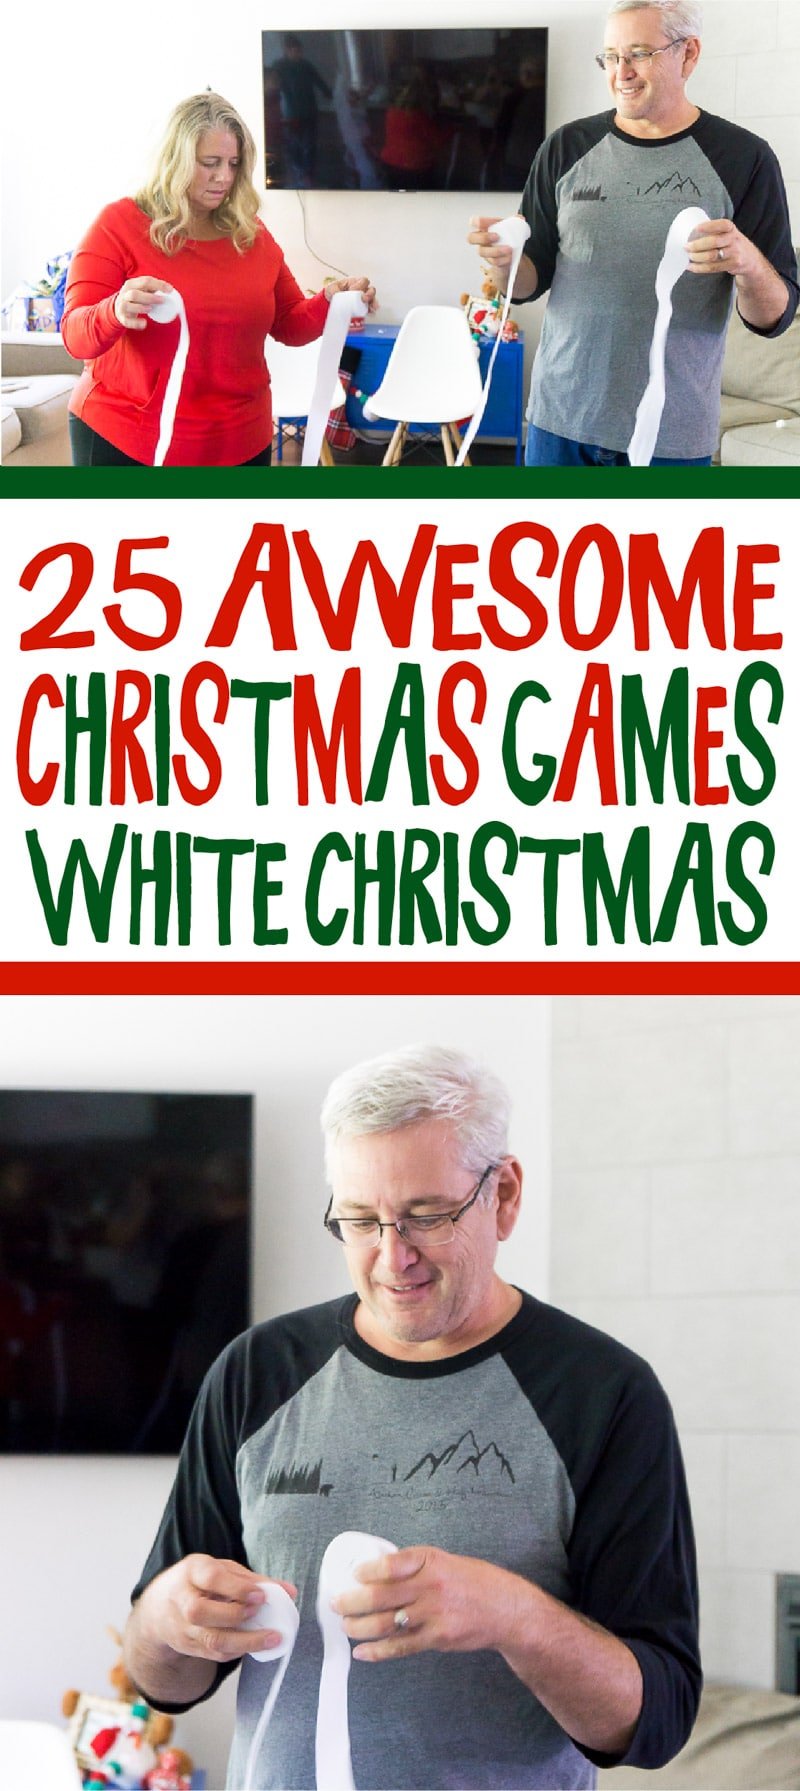 Hilarious Christmas games for adults, kids, and teens